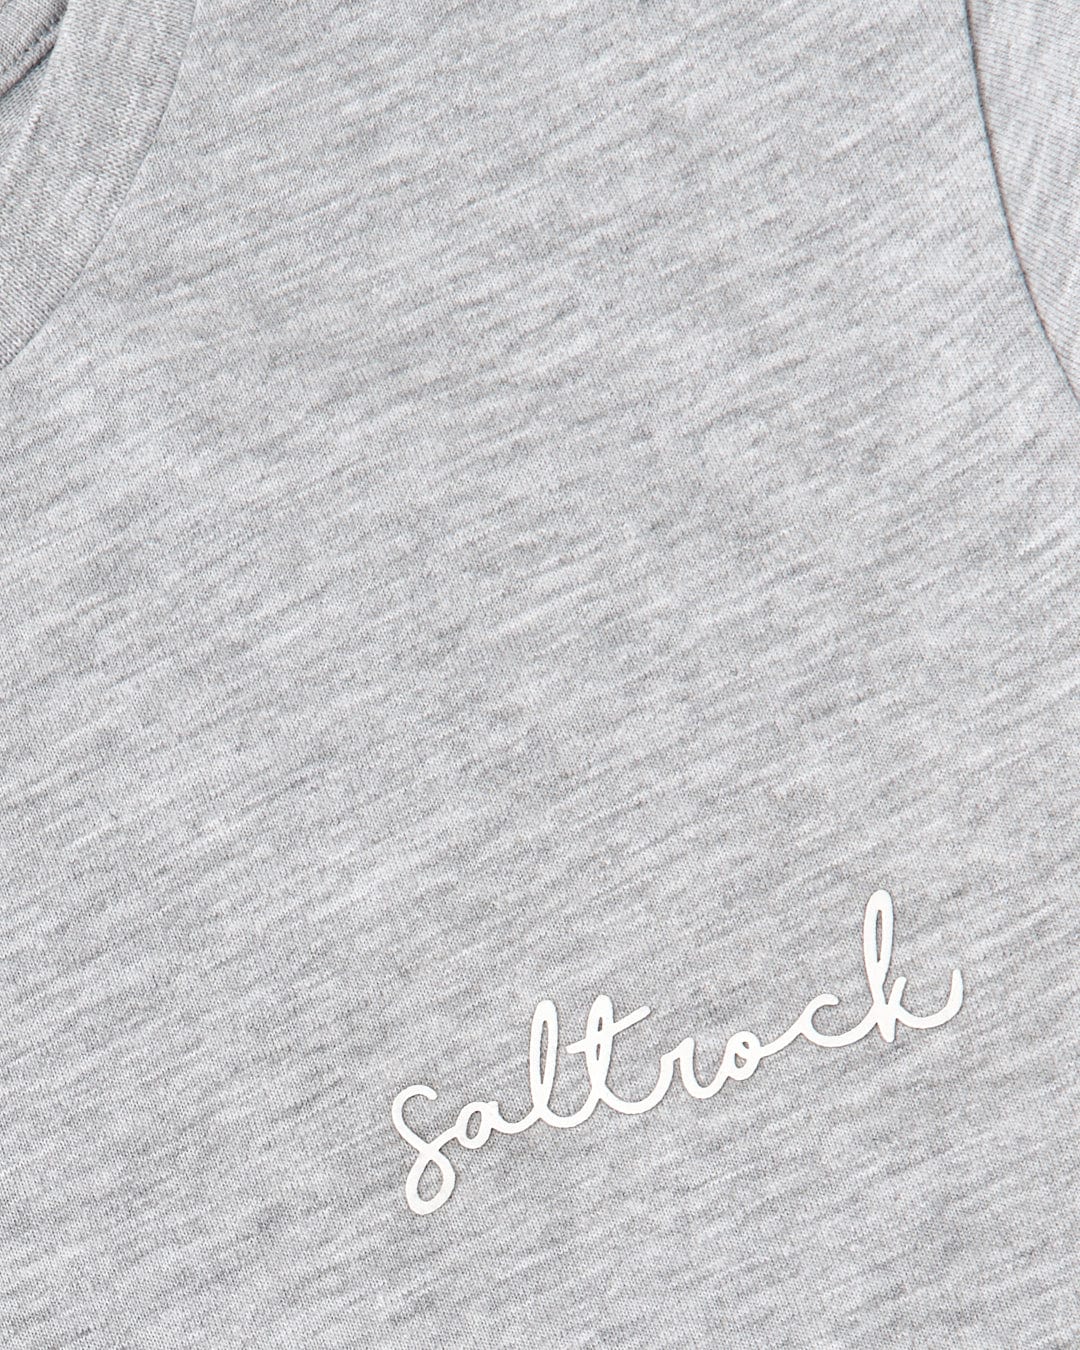 A grey Saltrock Velator - Womens Short Sleeve - Grey Marl t-shirt with high build chest embroidery and a peached soft hand feel finish.